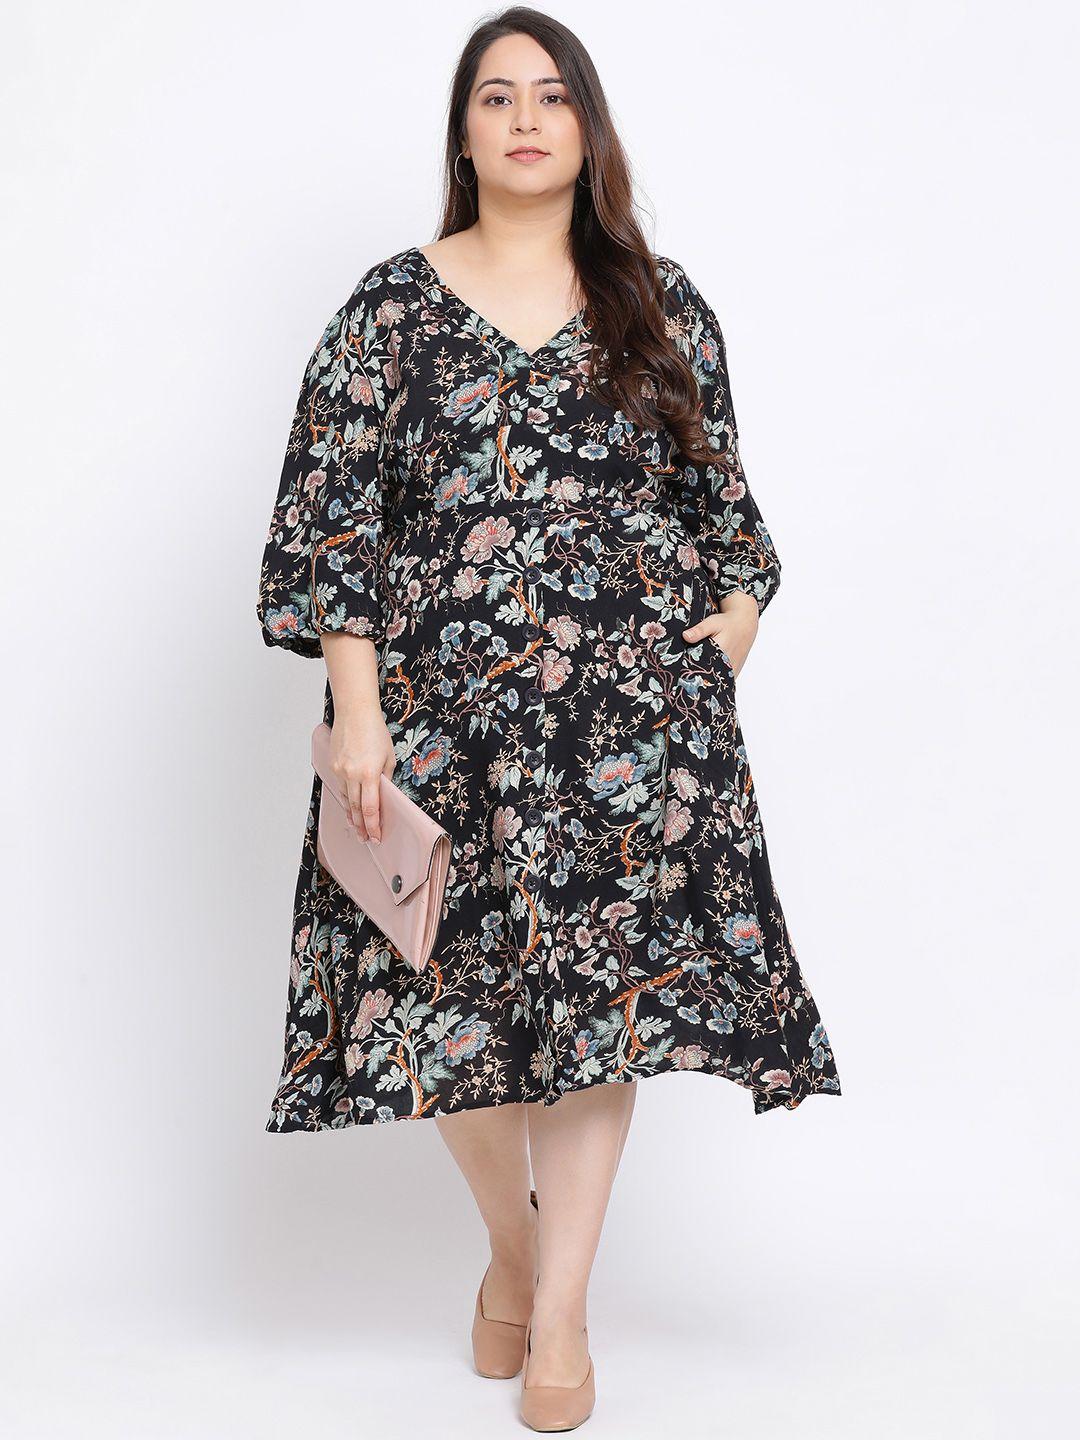 oxolloxo women multicoloured printed a-line dress